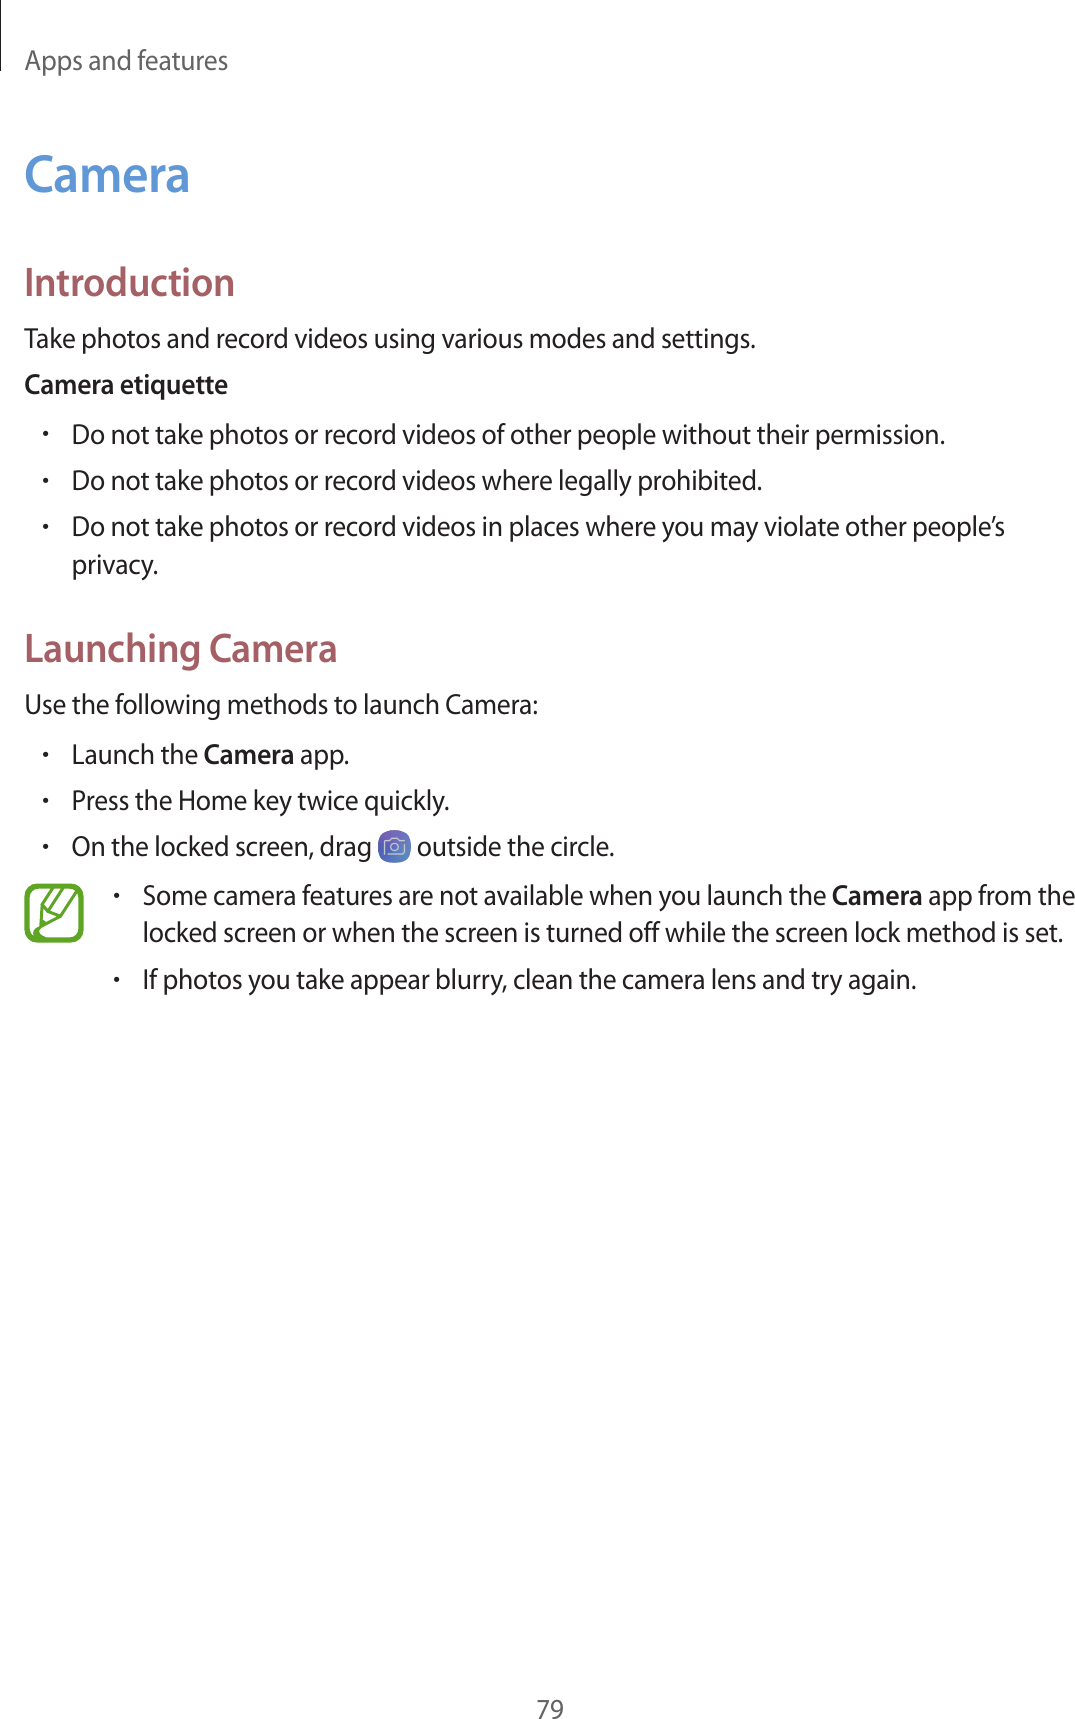 Apps and features79CameraIntroductionTake photos and record videos using various modes and settings.Camera etiquette•Do not take photos or record videos of other people without their permission.•Do not take photos or record videos where legally prohibited.•Do not take photos or record videos in places where you may violate other people’s privacy.Launching CameraUse the following methods to launch Camera:•Launch the Camera app.•Press the Home key twice quickly.•On the locked screen, drag   outside the circle.•Some camera features are not available when you launch the Camera app from the locked screen or when the screen is turned off while the screen lock method is set.•If photos you take appear blurry, clean the camera lens and try again.